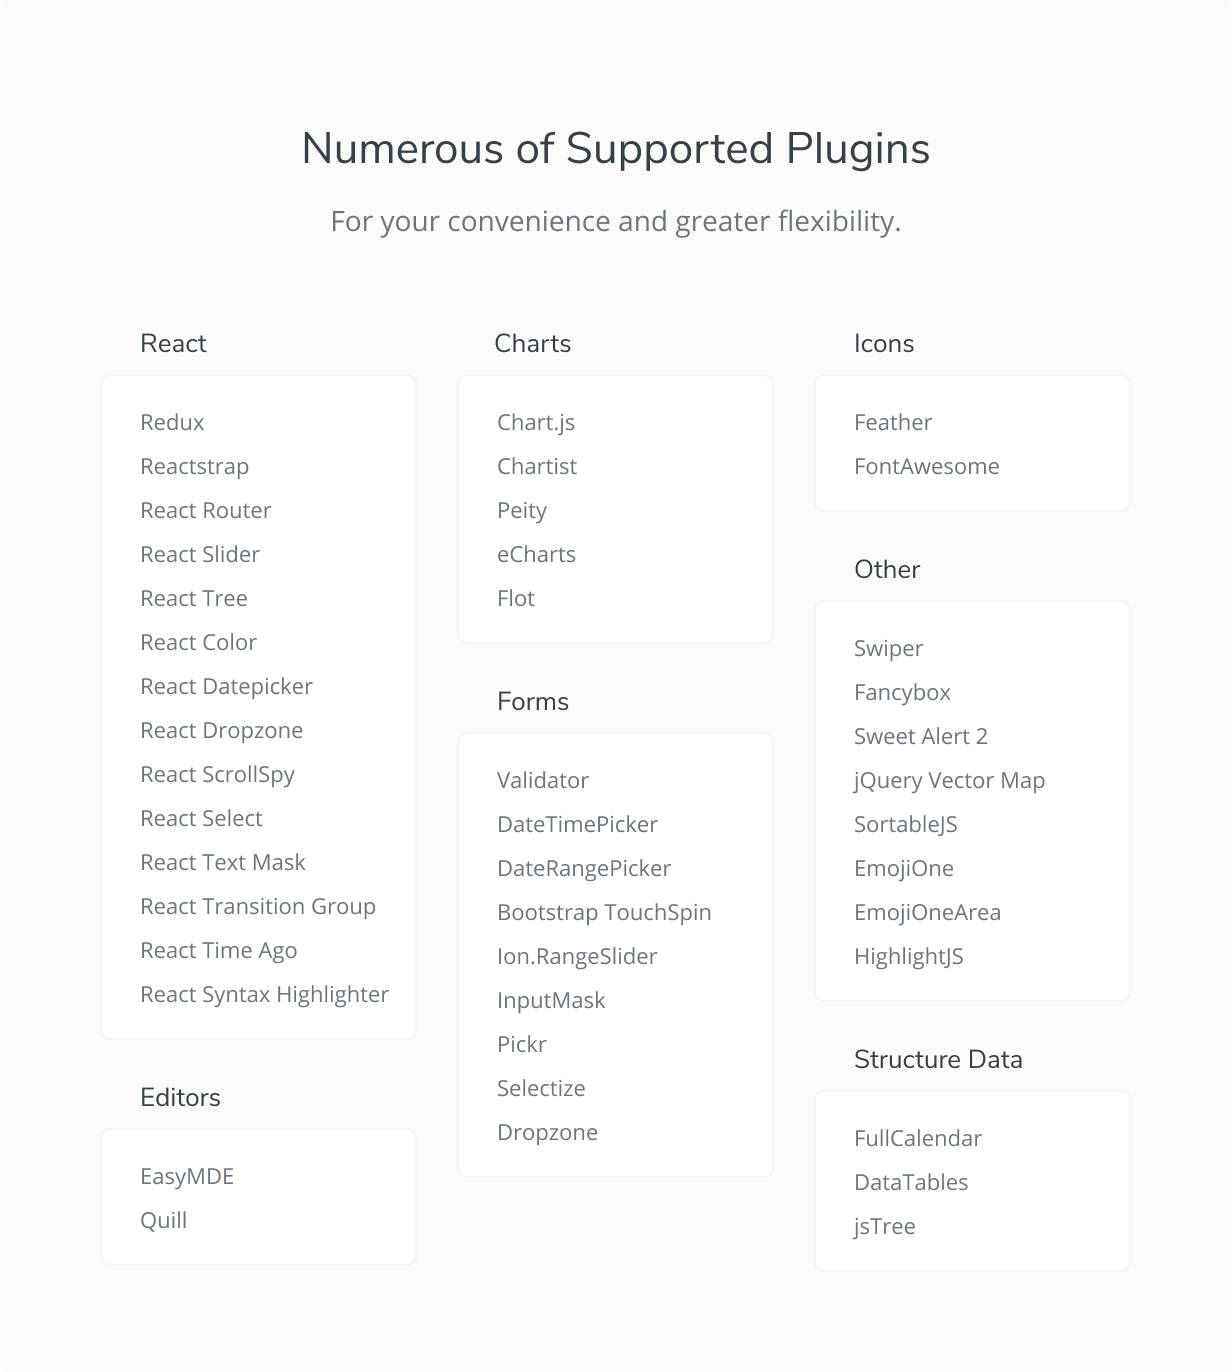 A lot of supported plugins